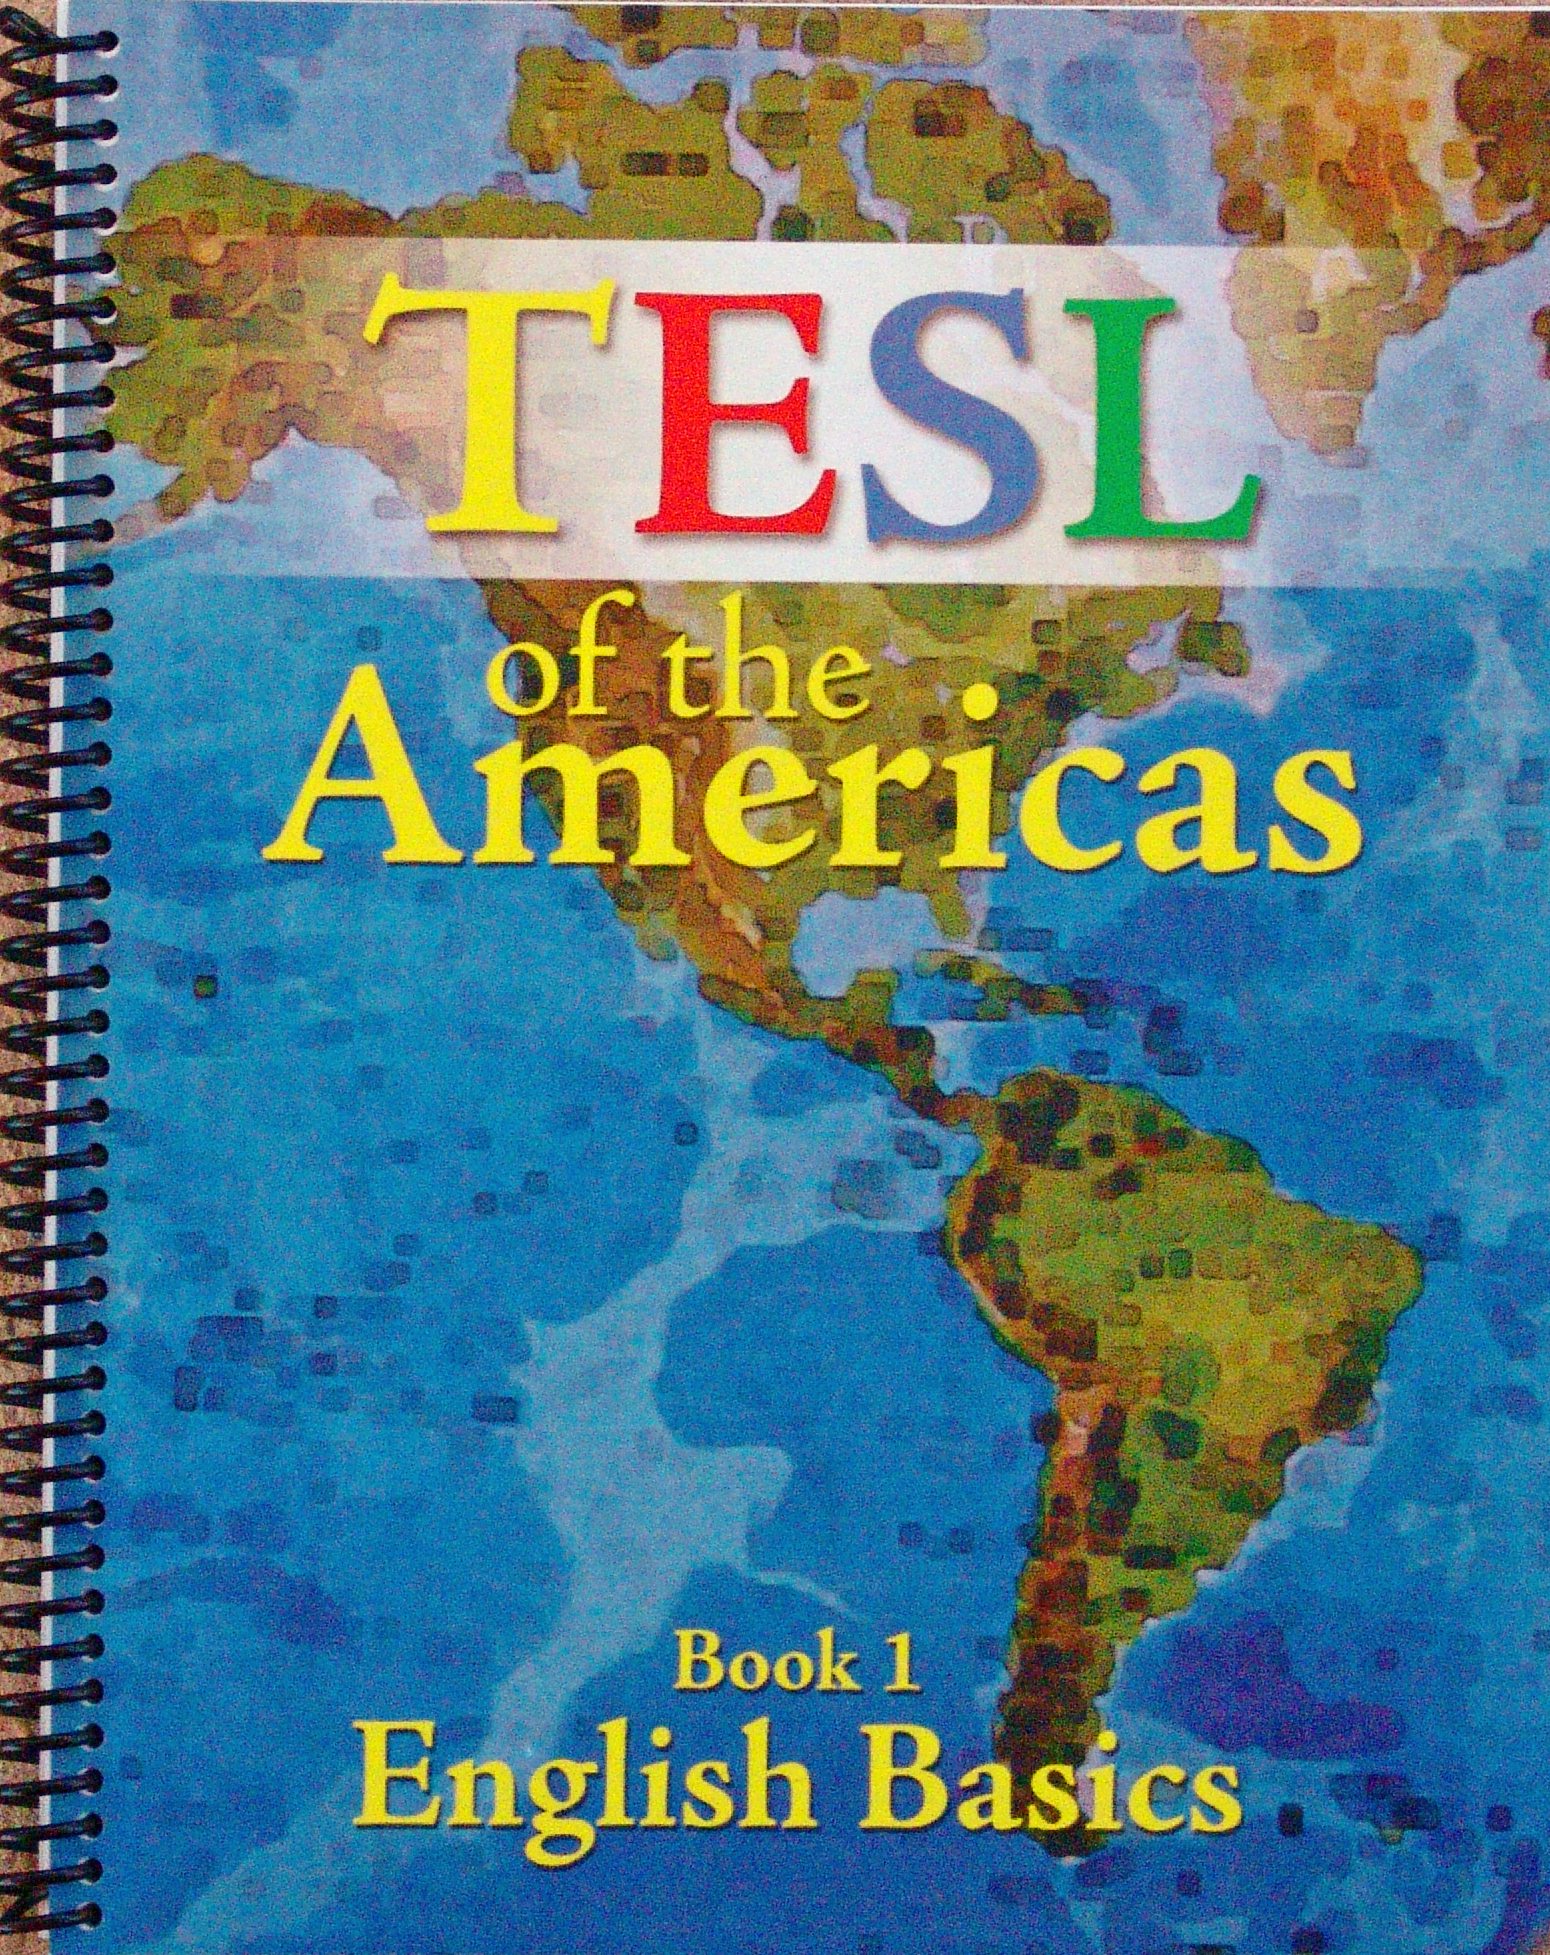 tesl of the americas